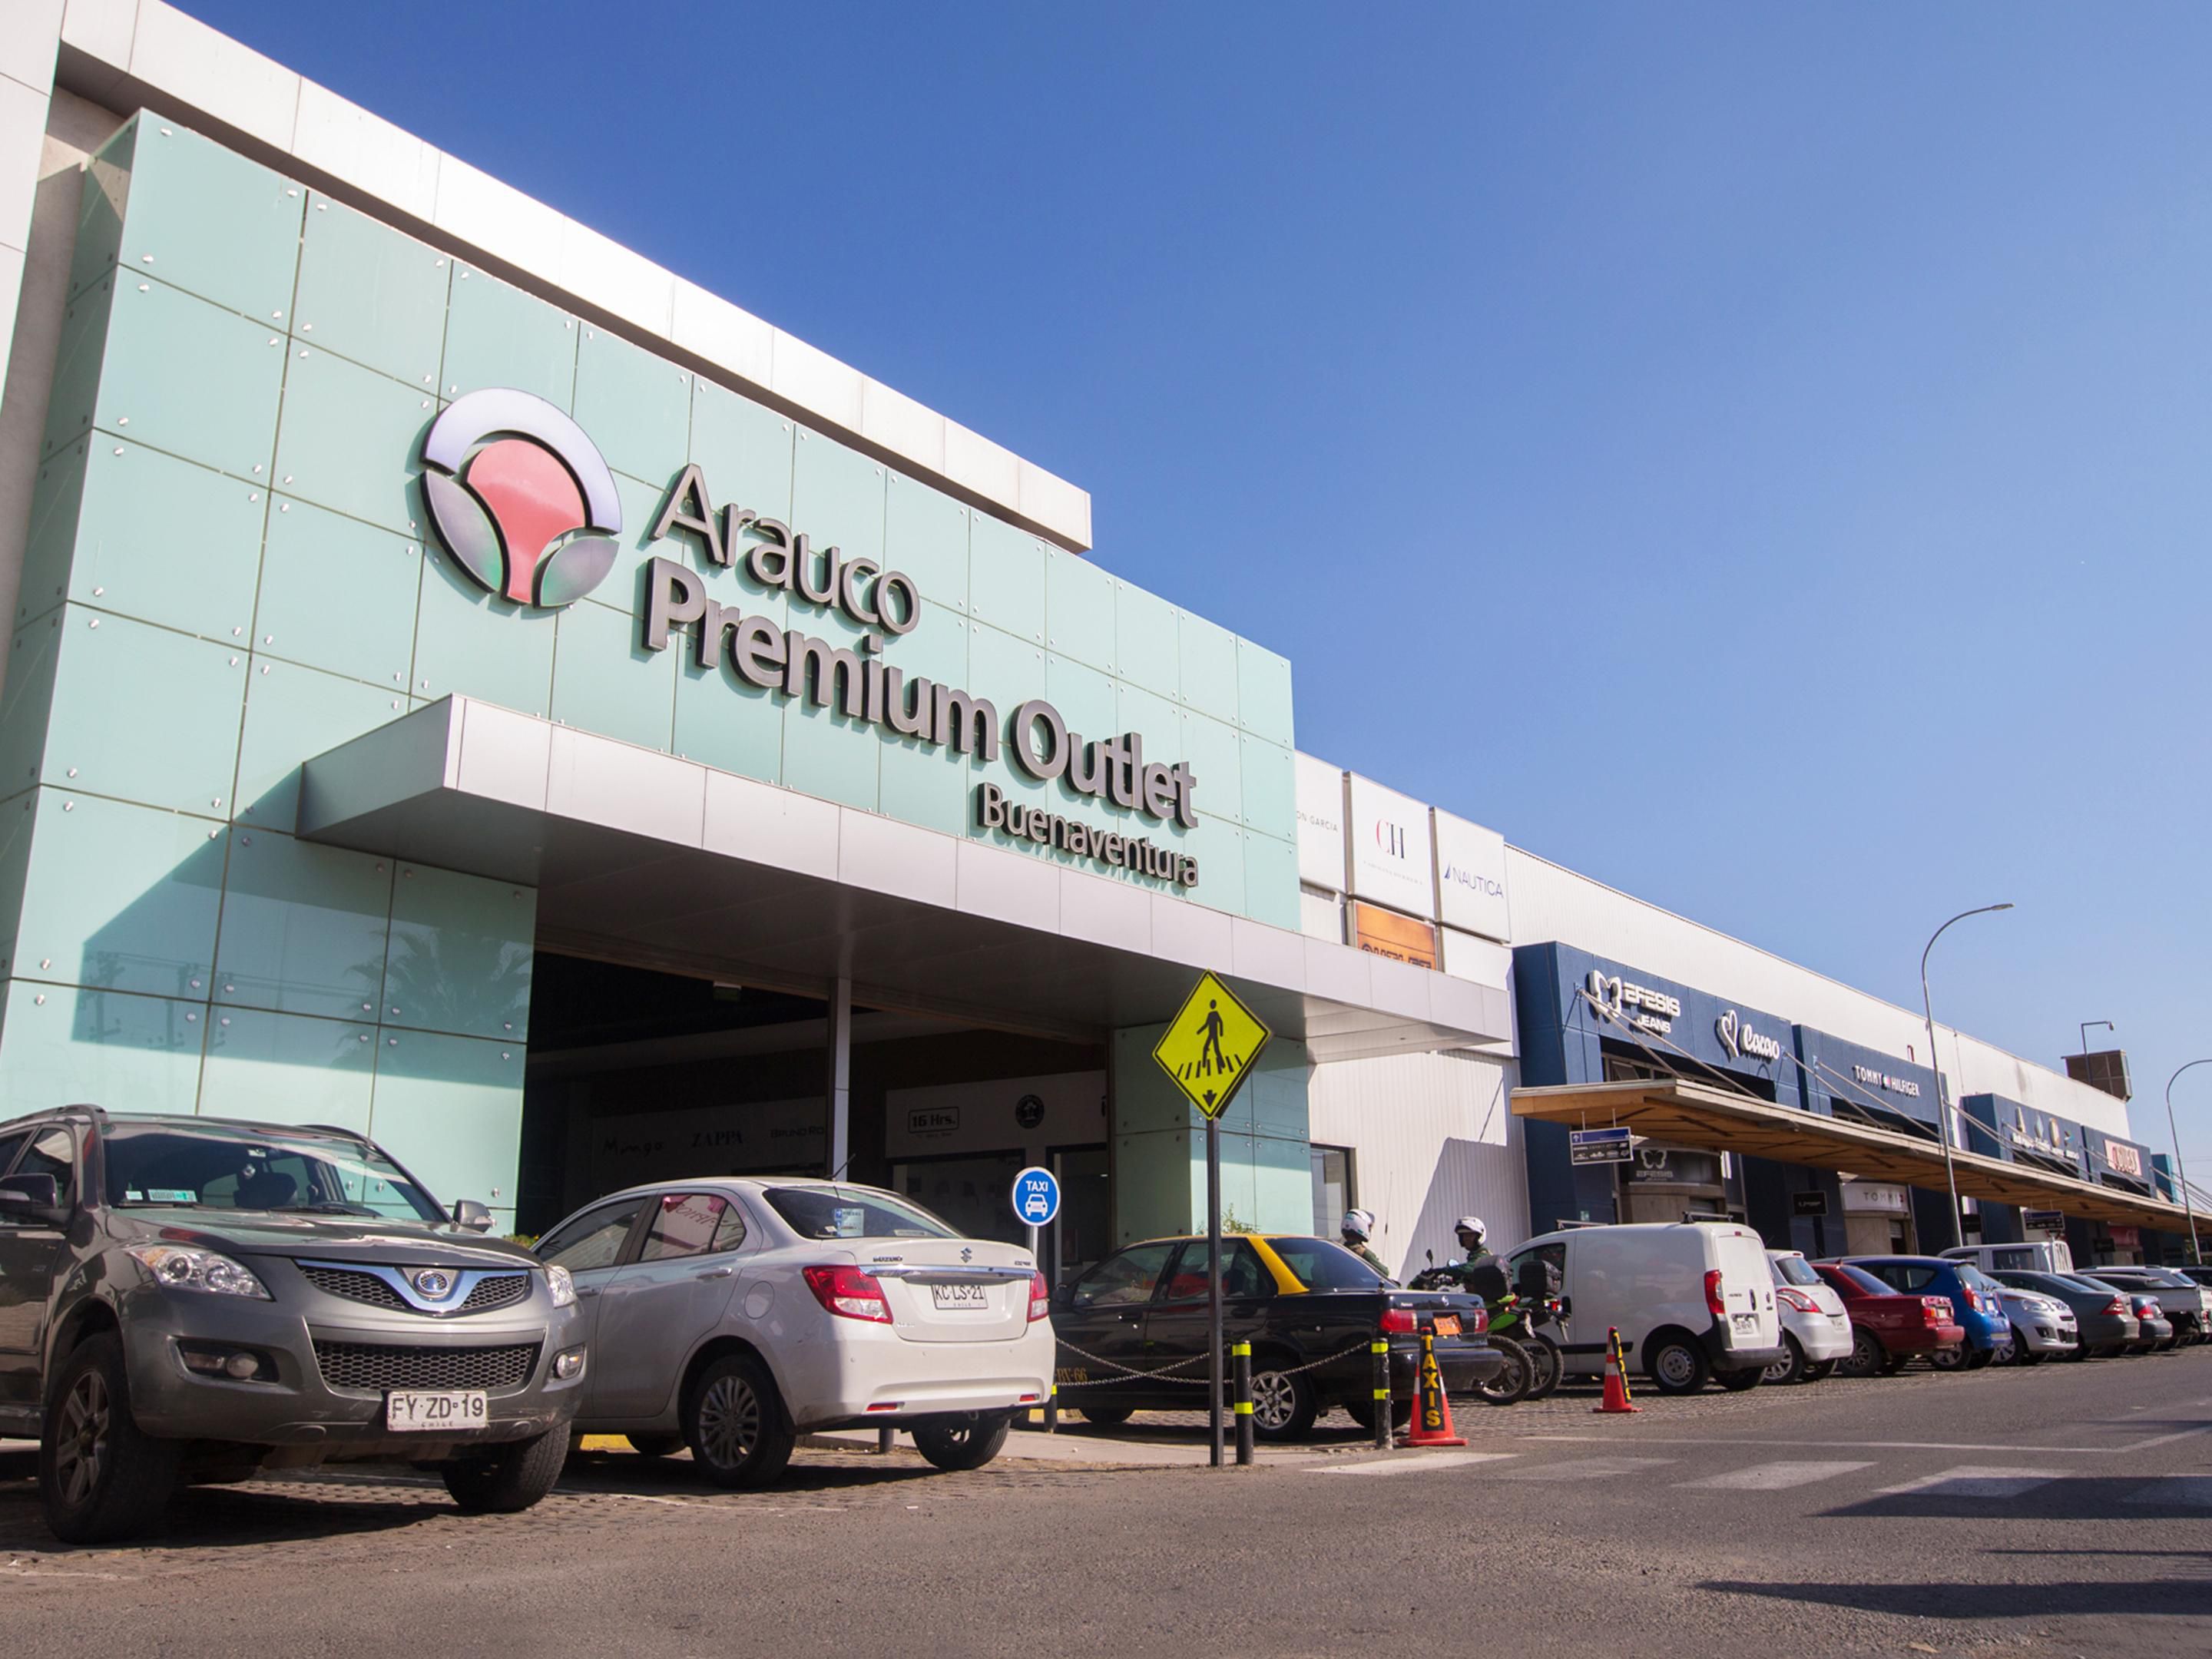 For shopping, head to Buenaventura-Quilicura zone. You will find 2 outlet malls with a varied selection of retail stores (Nike, Polo Ralph Lauren, Puma, Rapsodia). Easton Outlet and Arauco Premium Outlet Buenaventura. The adress is Presidente Eduardo Frei Montalva 9709, Quilicura.